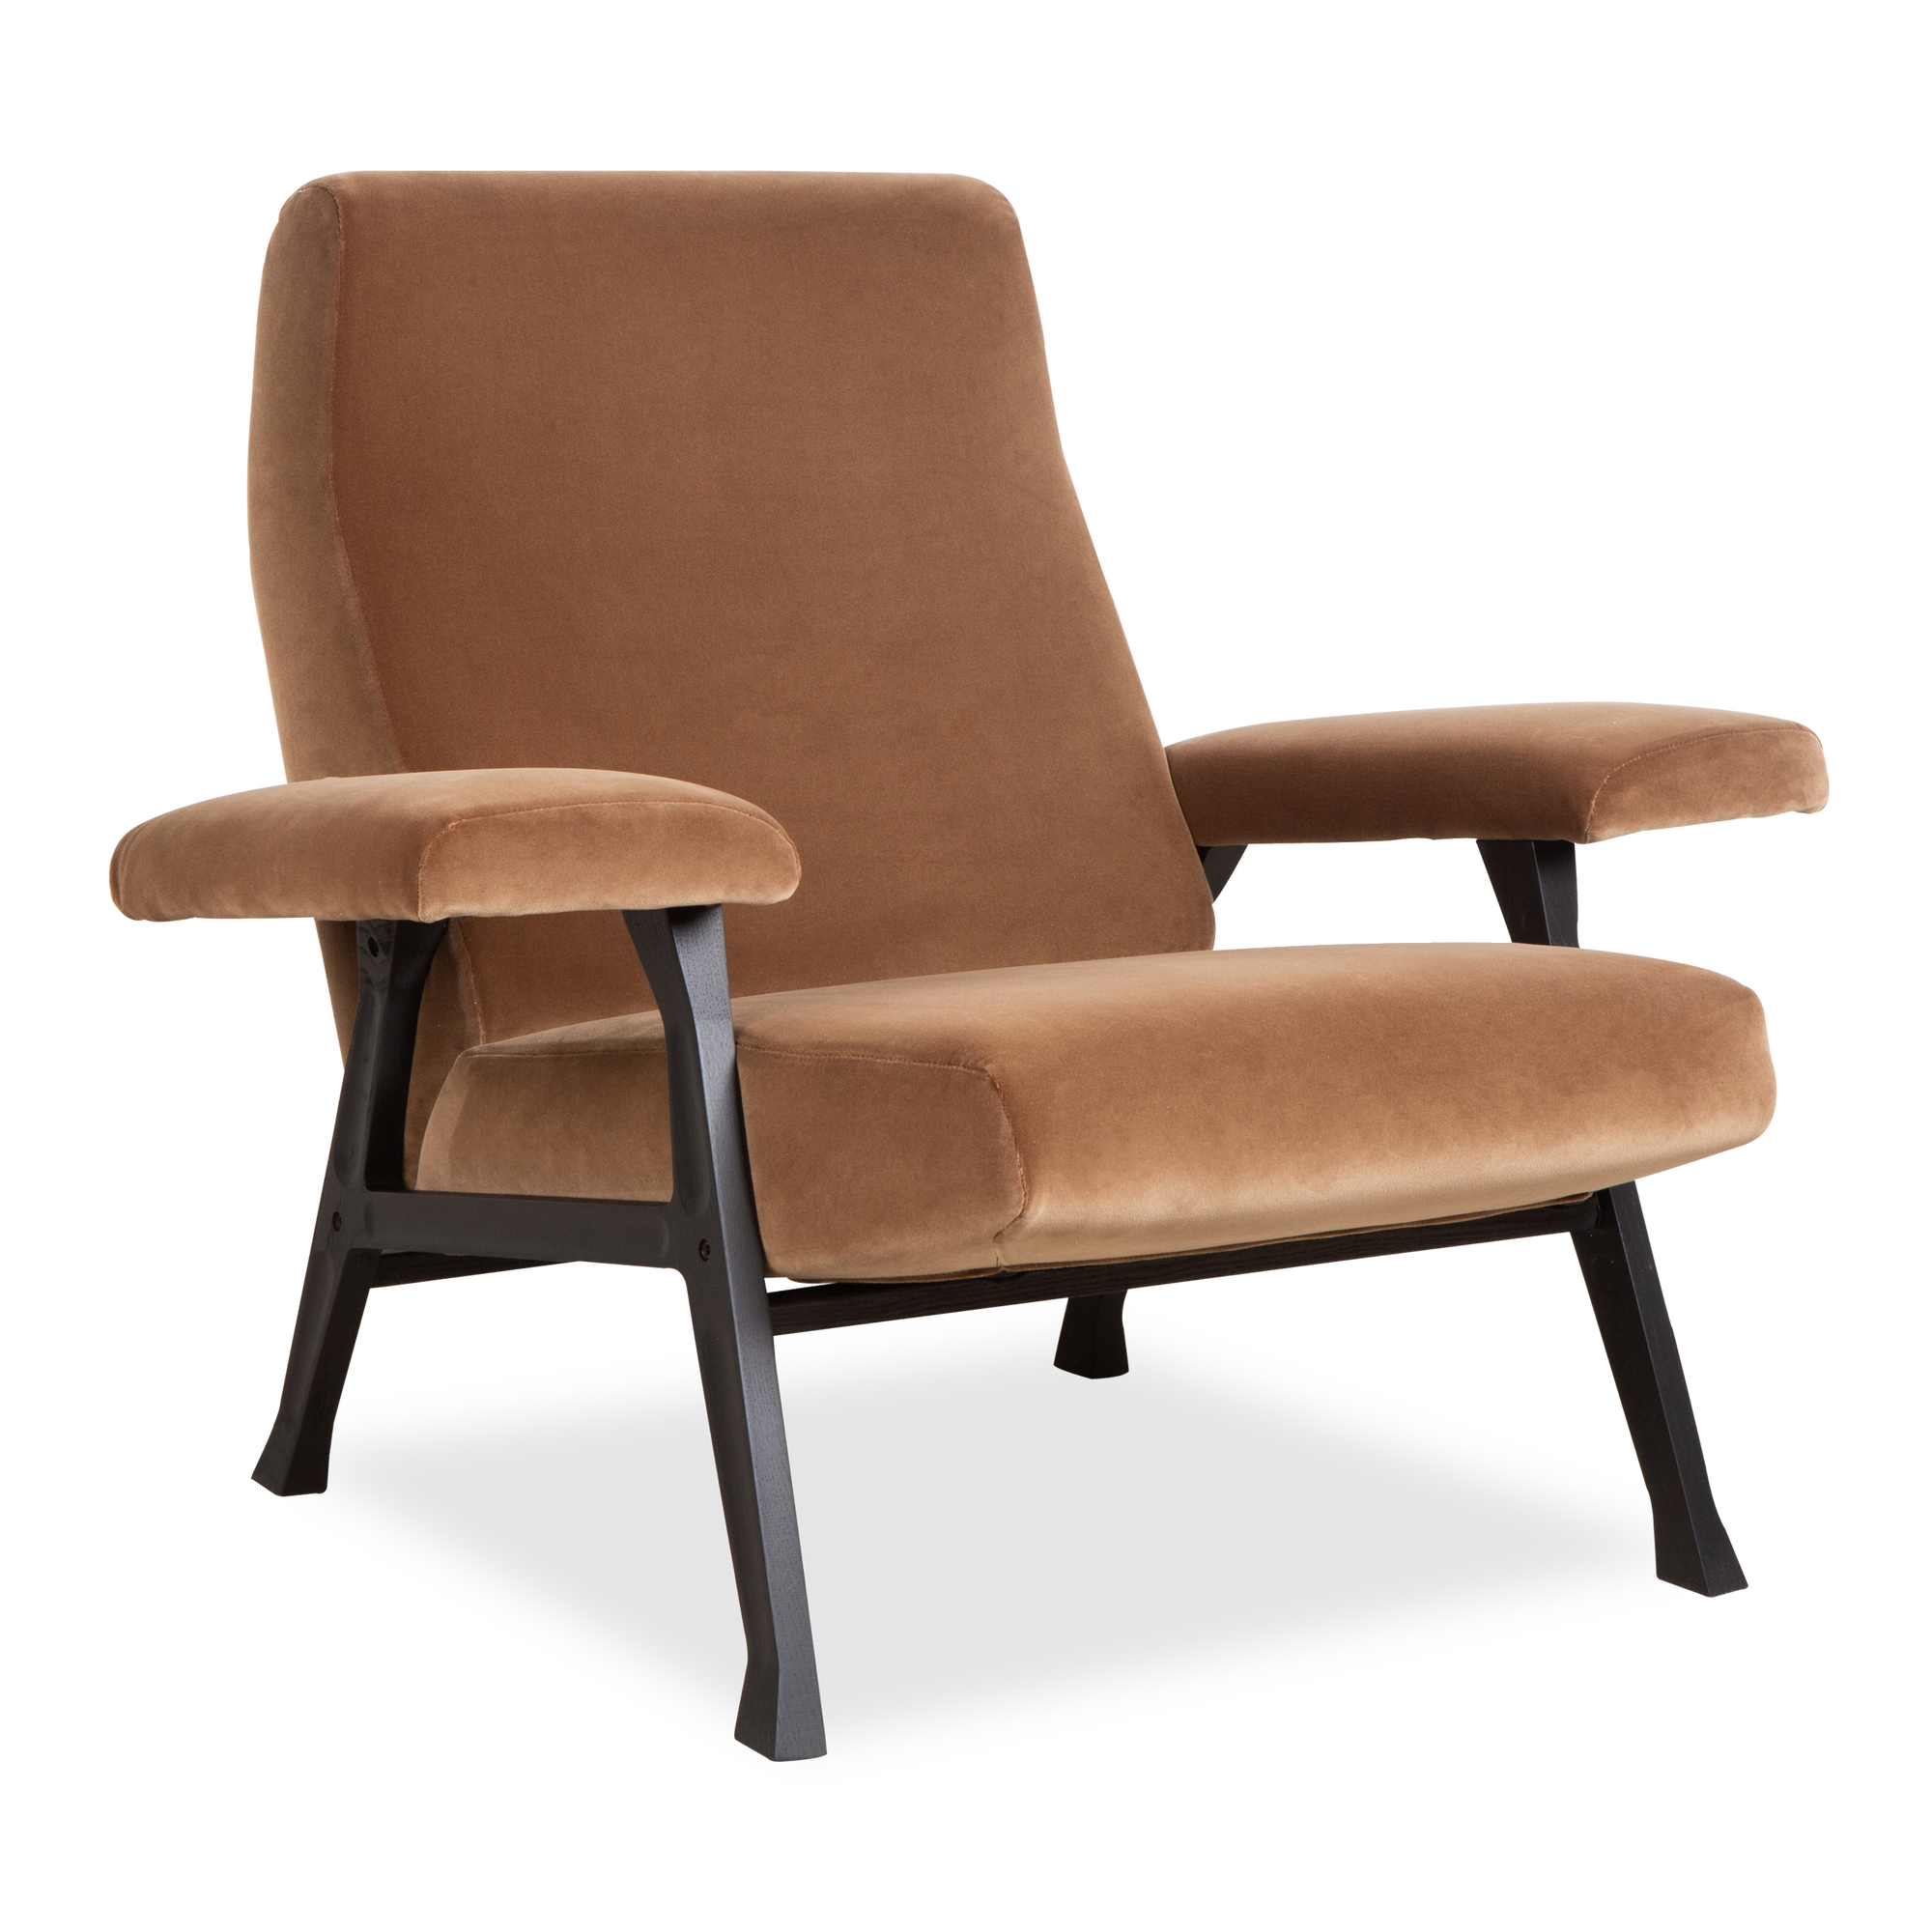 The Hall Armchair from arflex, a mid-century classic, is a striking blend of modern aesthetics and ergonomic comfort.